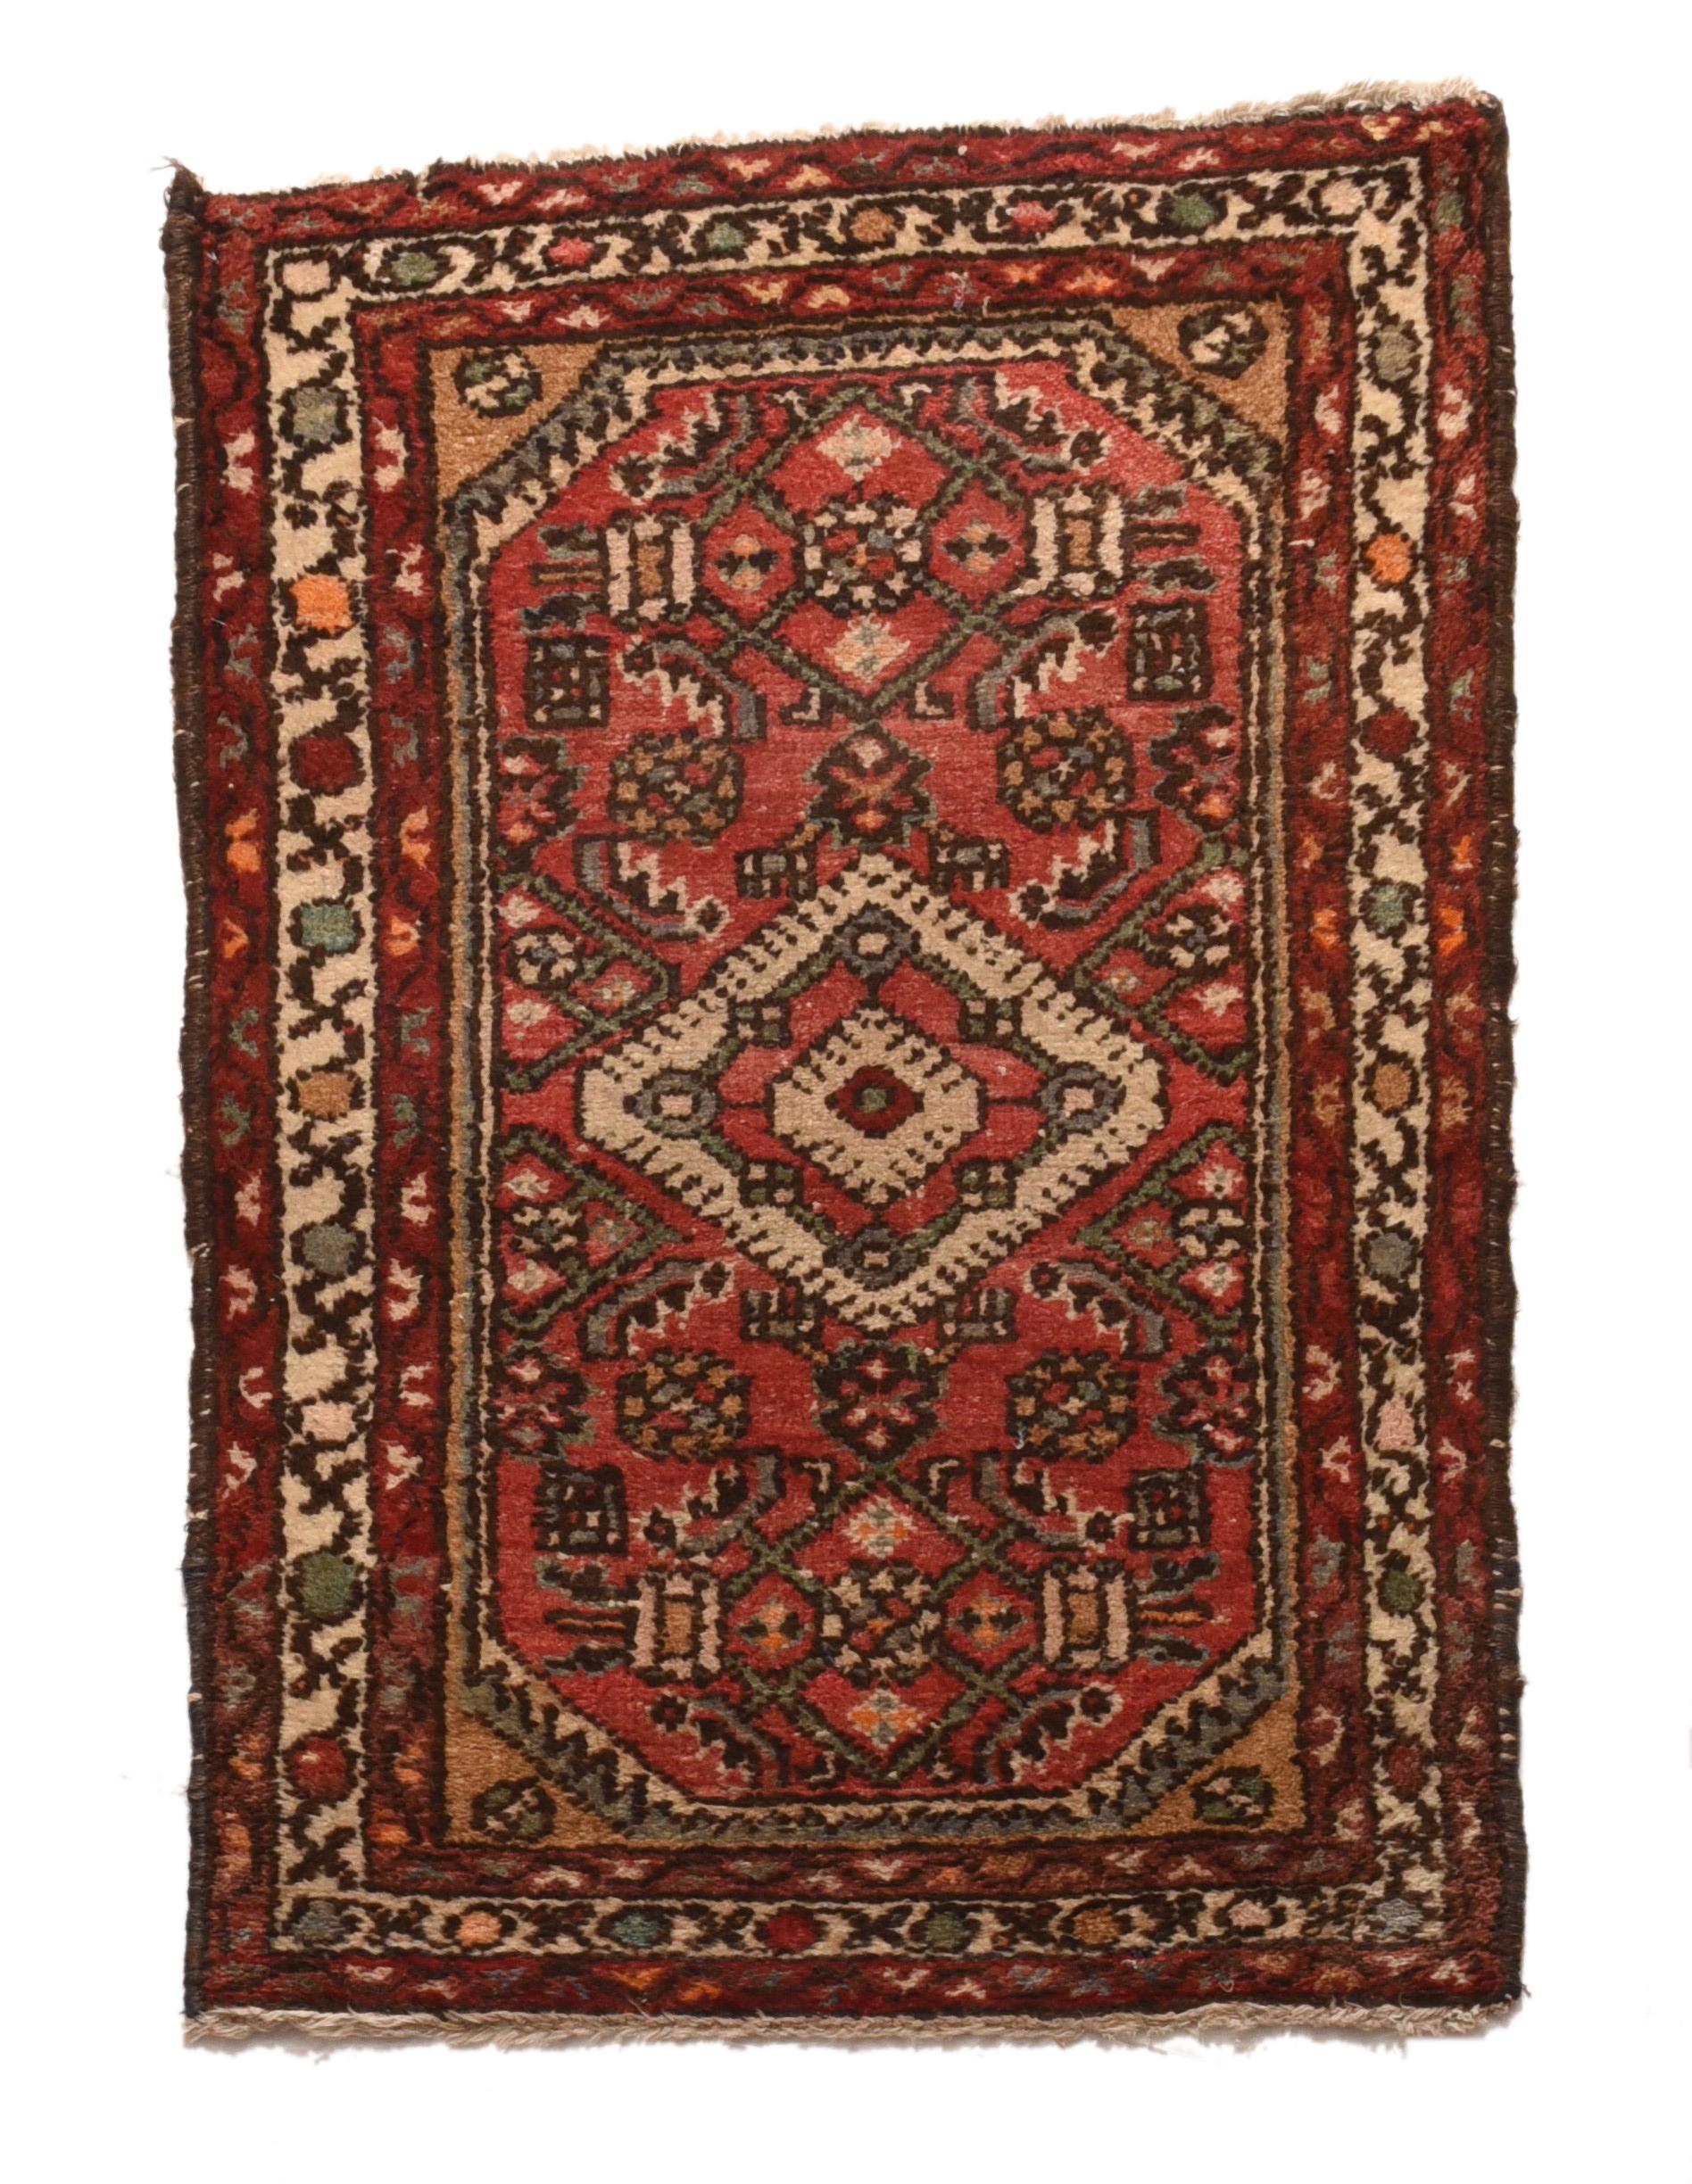 Other Fine Antique Hamedan Persian Rug, Hand Knotted, circa 1920